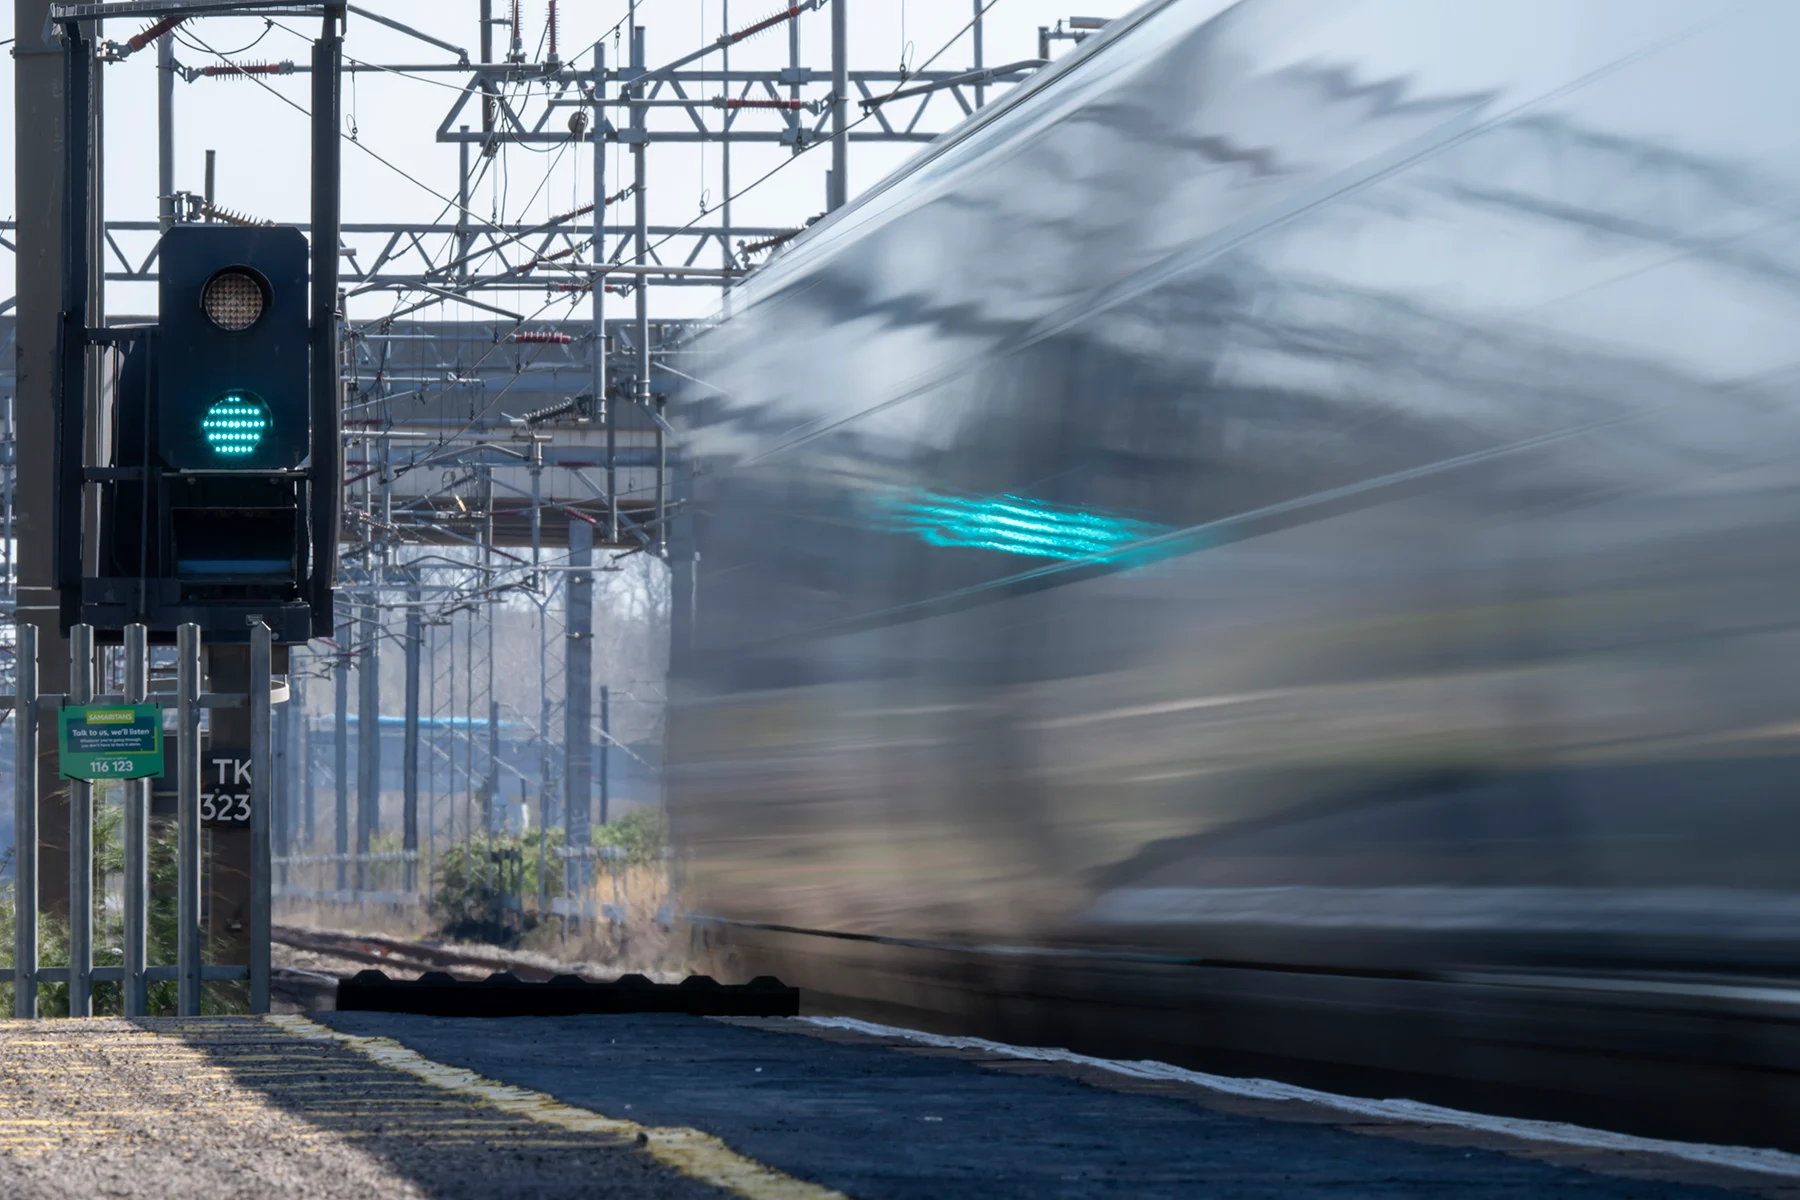 A train travelling at speed passing a green signal light